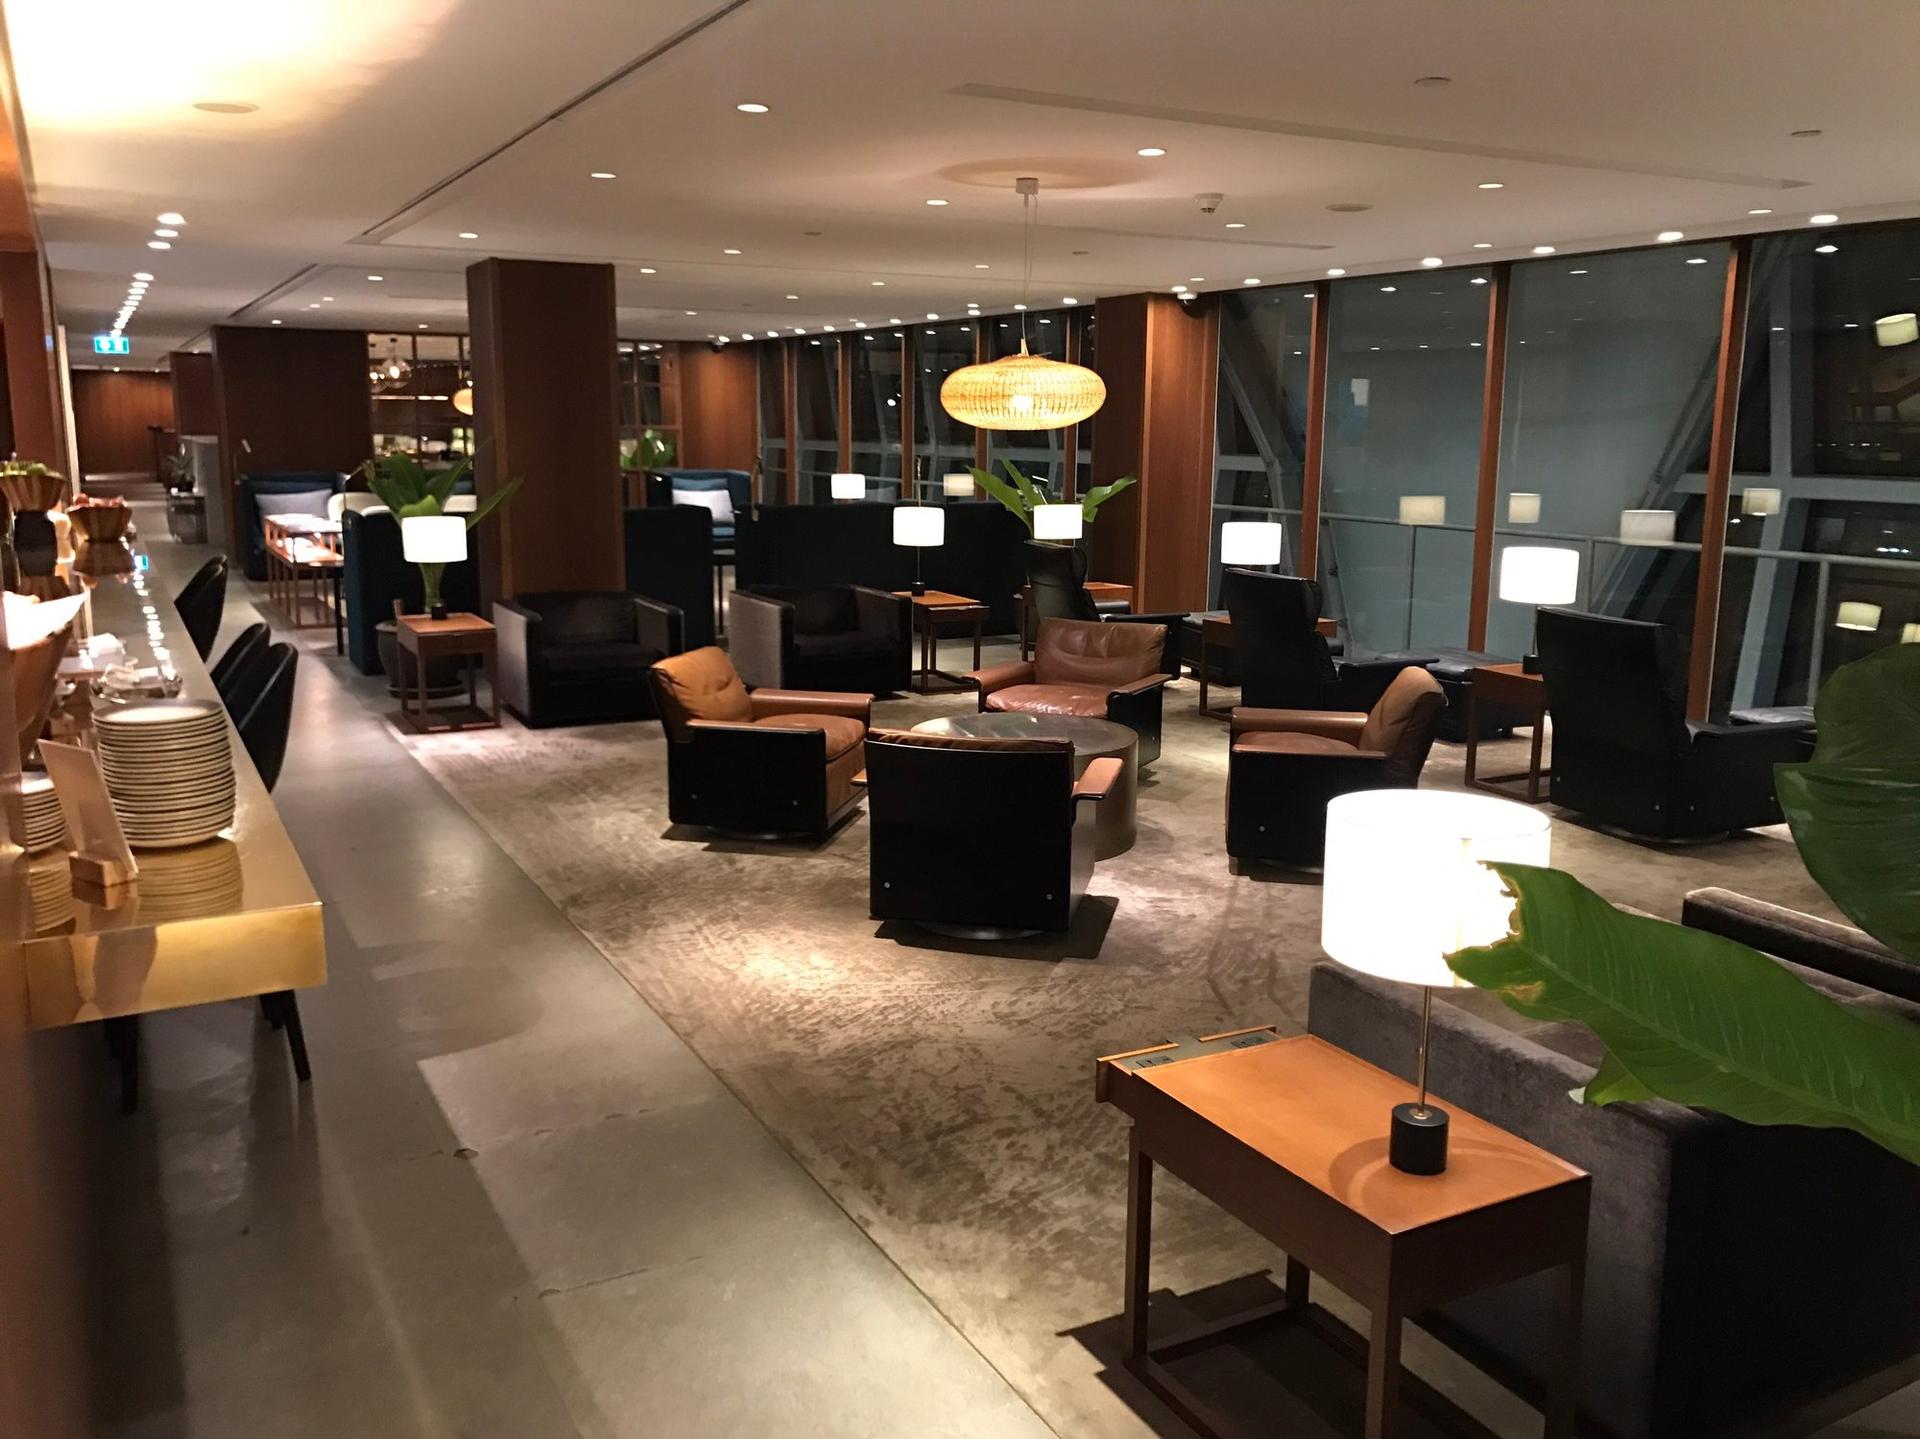 Cathay Pacific First and Business Class Lounge image 34 of 69